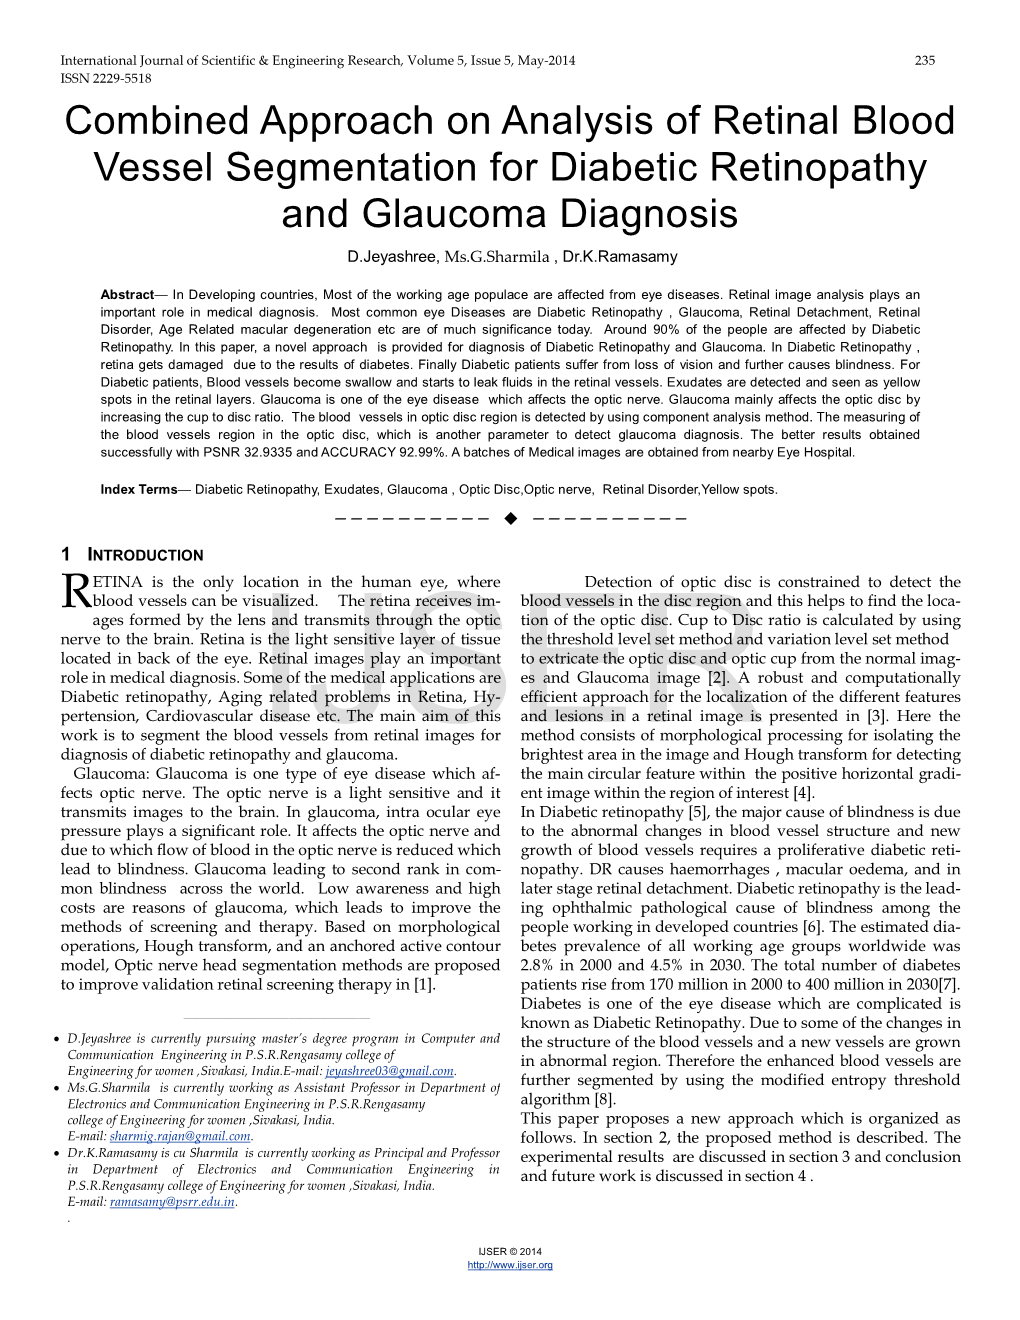 Combined Approach on Analysis of Retinal Blood Vessel Segmentation for Diabetic Retinopathy and Glaucoma Diagnosis D.Jeyashree, Ms.G.Sharmila , Dr.K.Ramasamy